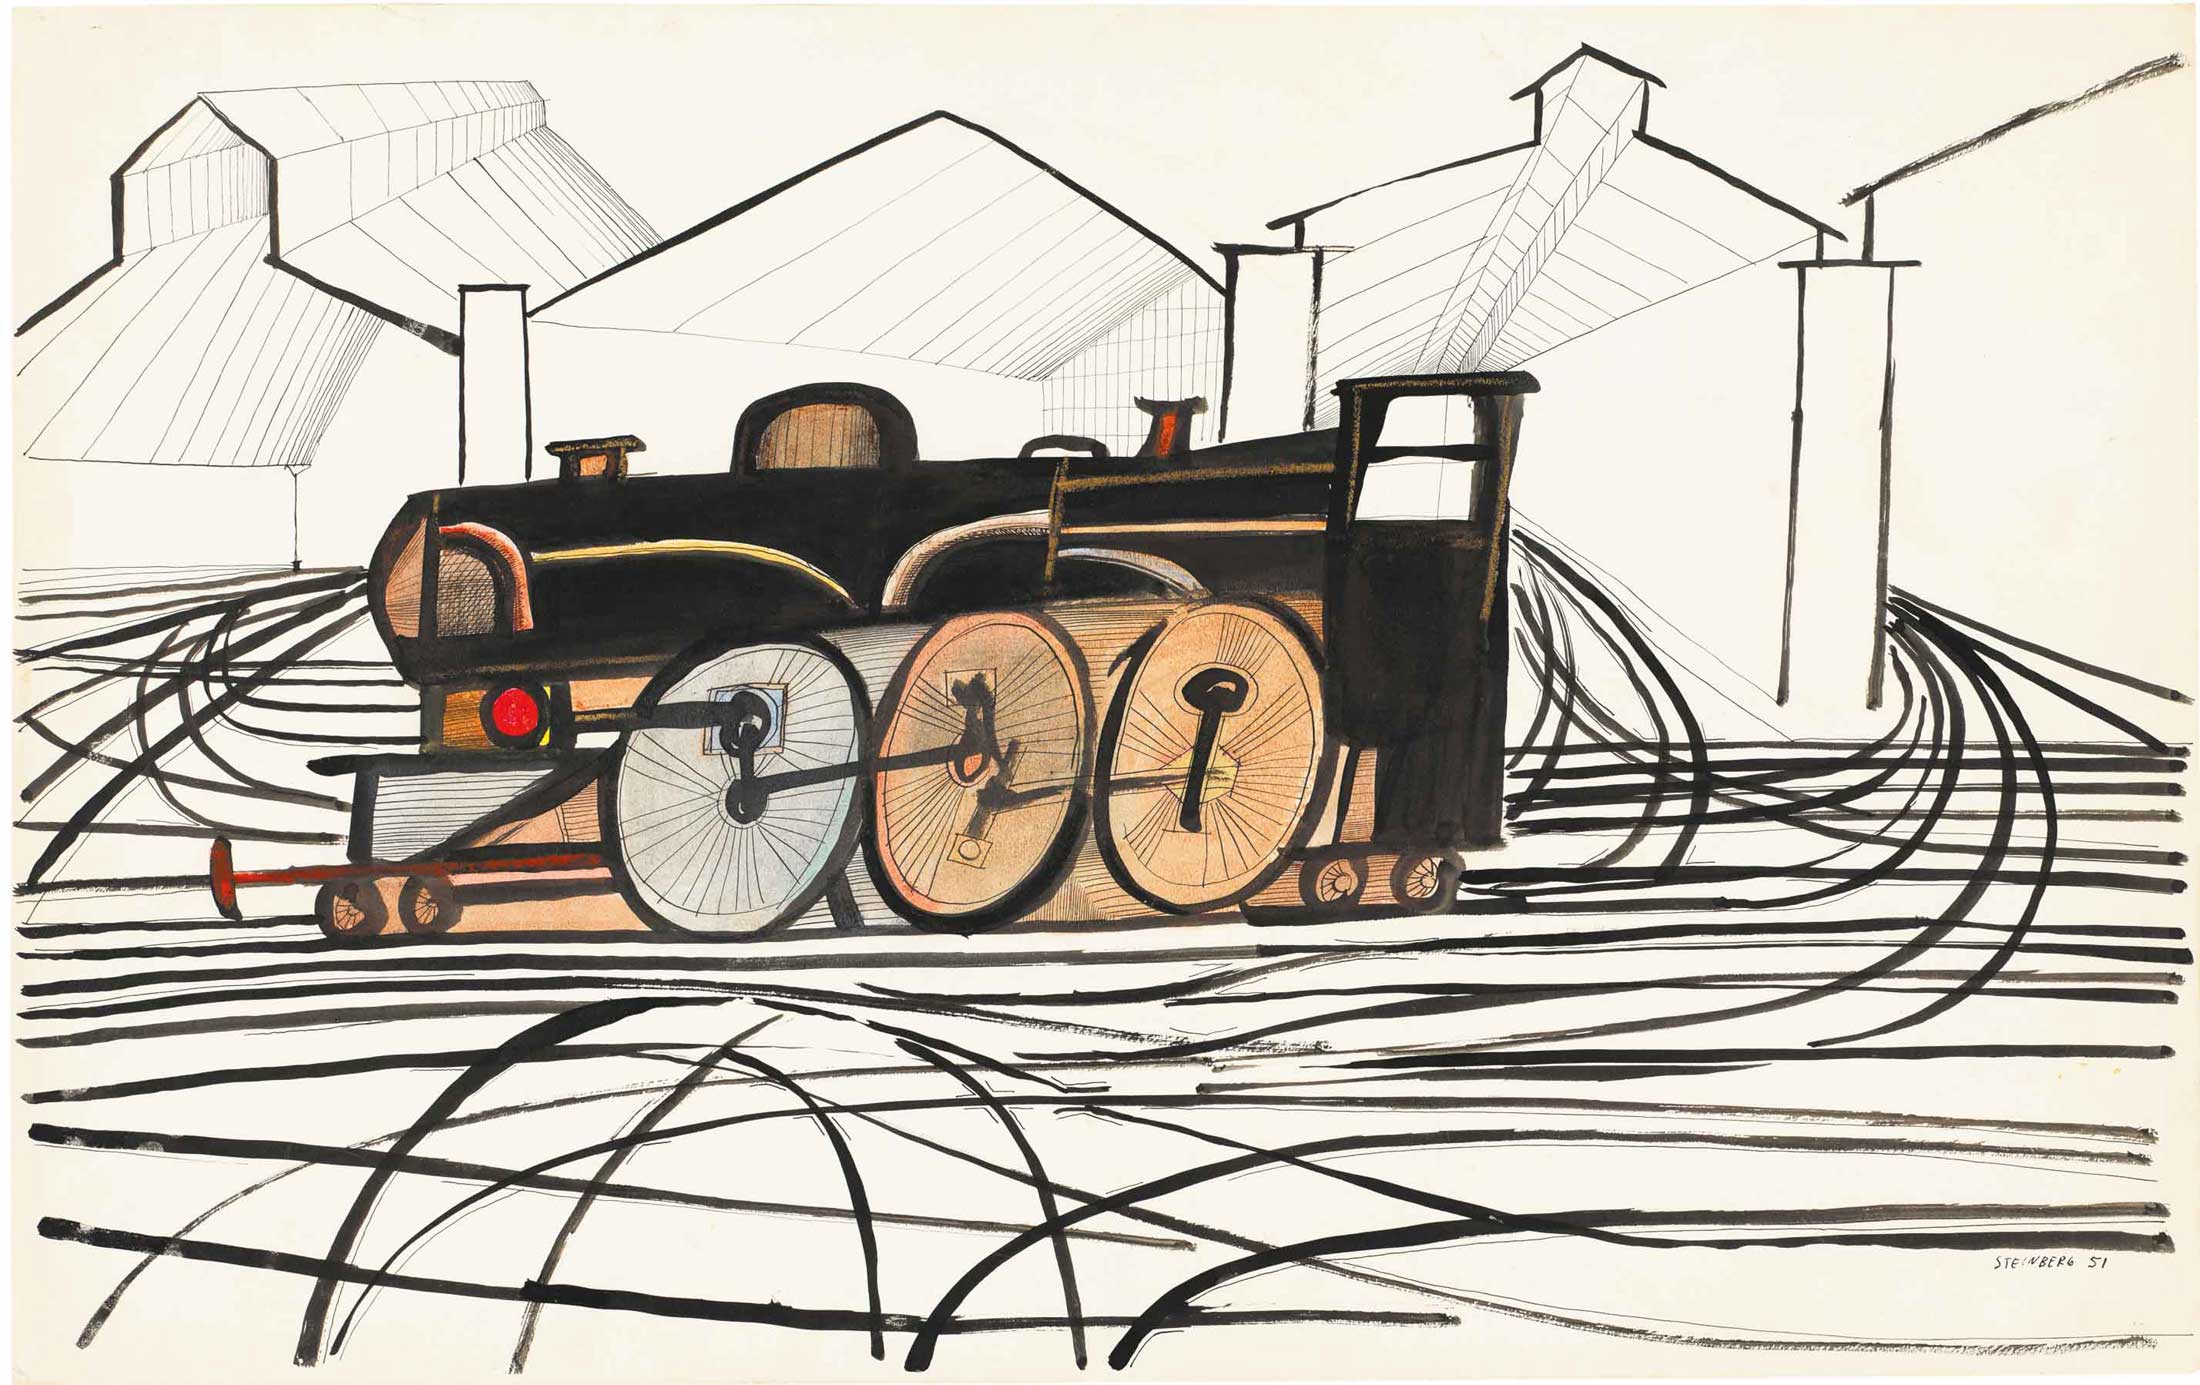 <em>Engine</em>, 1951. Ink and crayon on paper, 14 ½ x 23 in. Museum of Fine Arts, Boston; Gift of The Saul Steinberg Foundation.